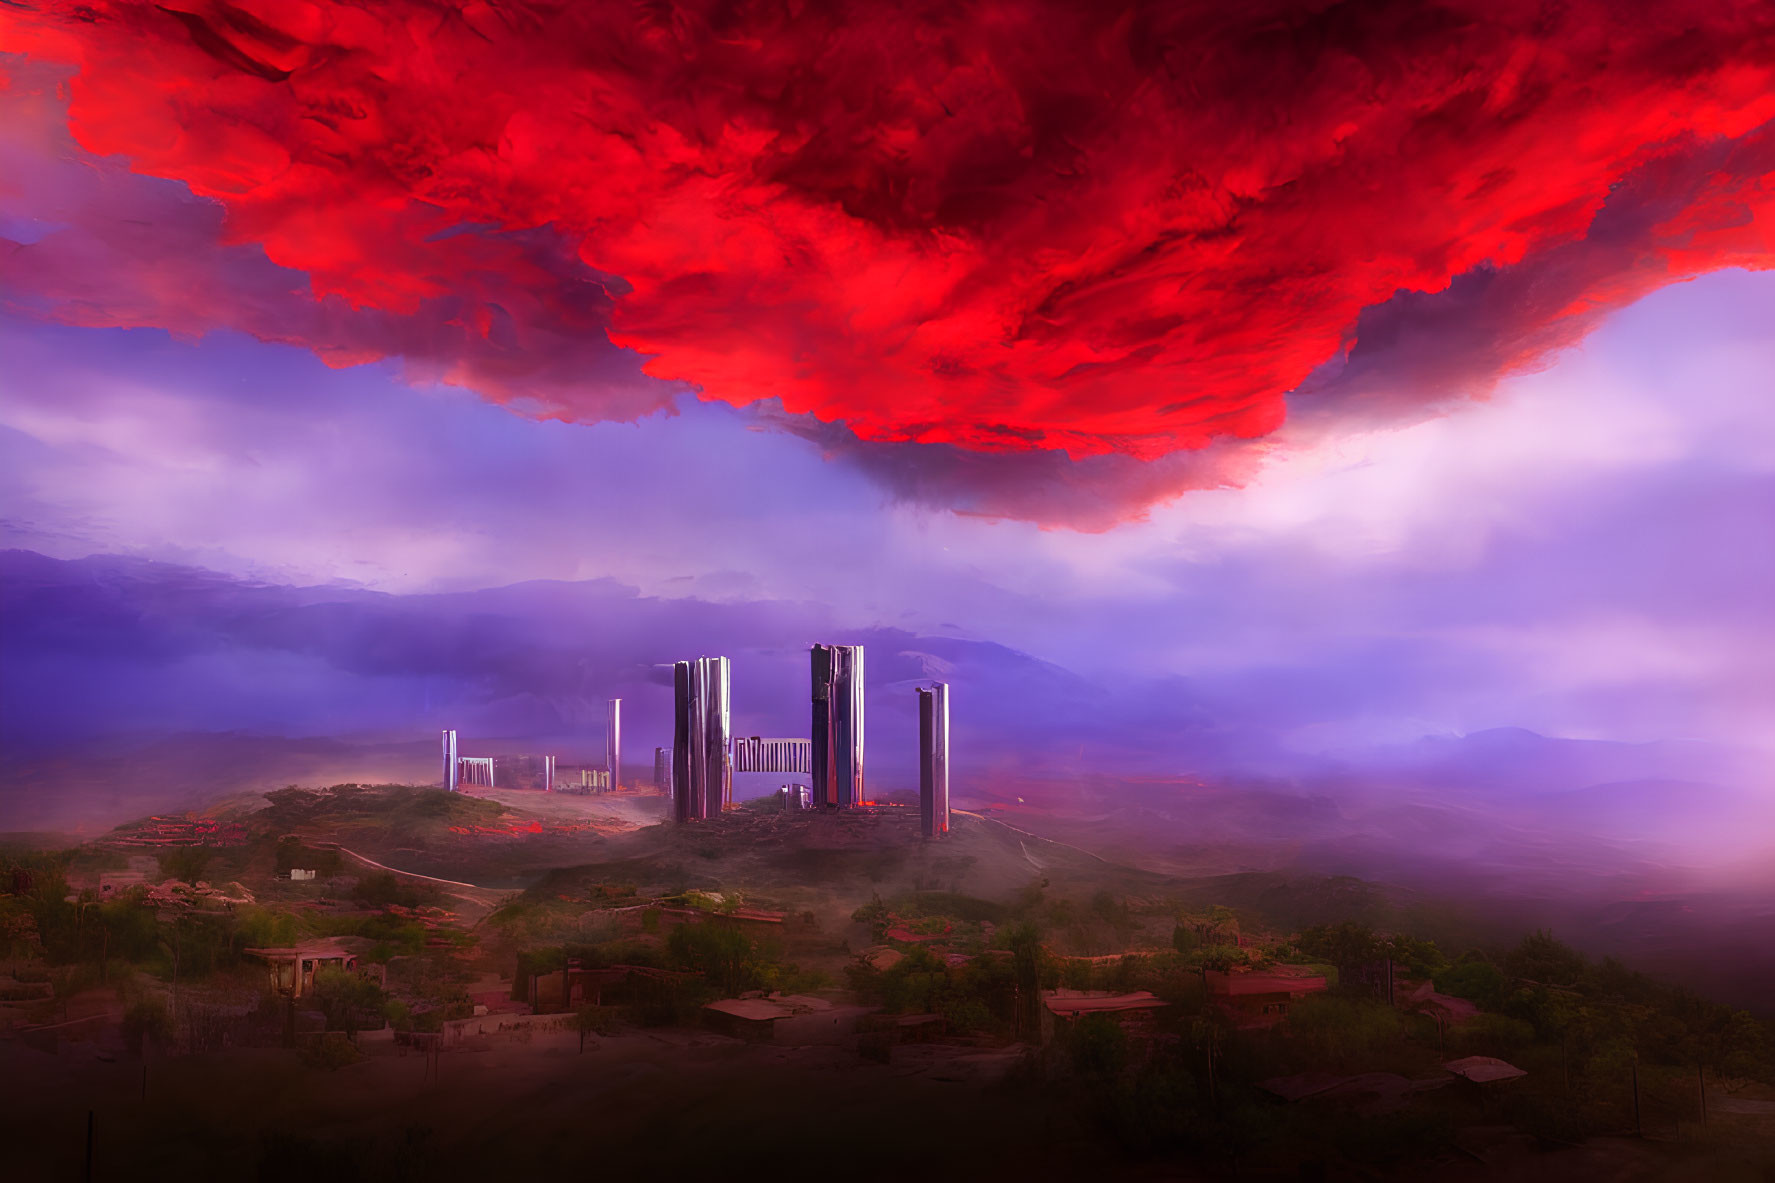 Surreal landscape with red clouds and futuristic skyscrapers